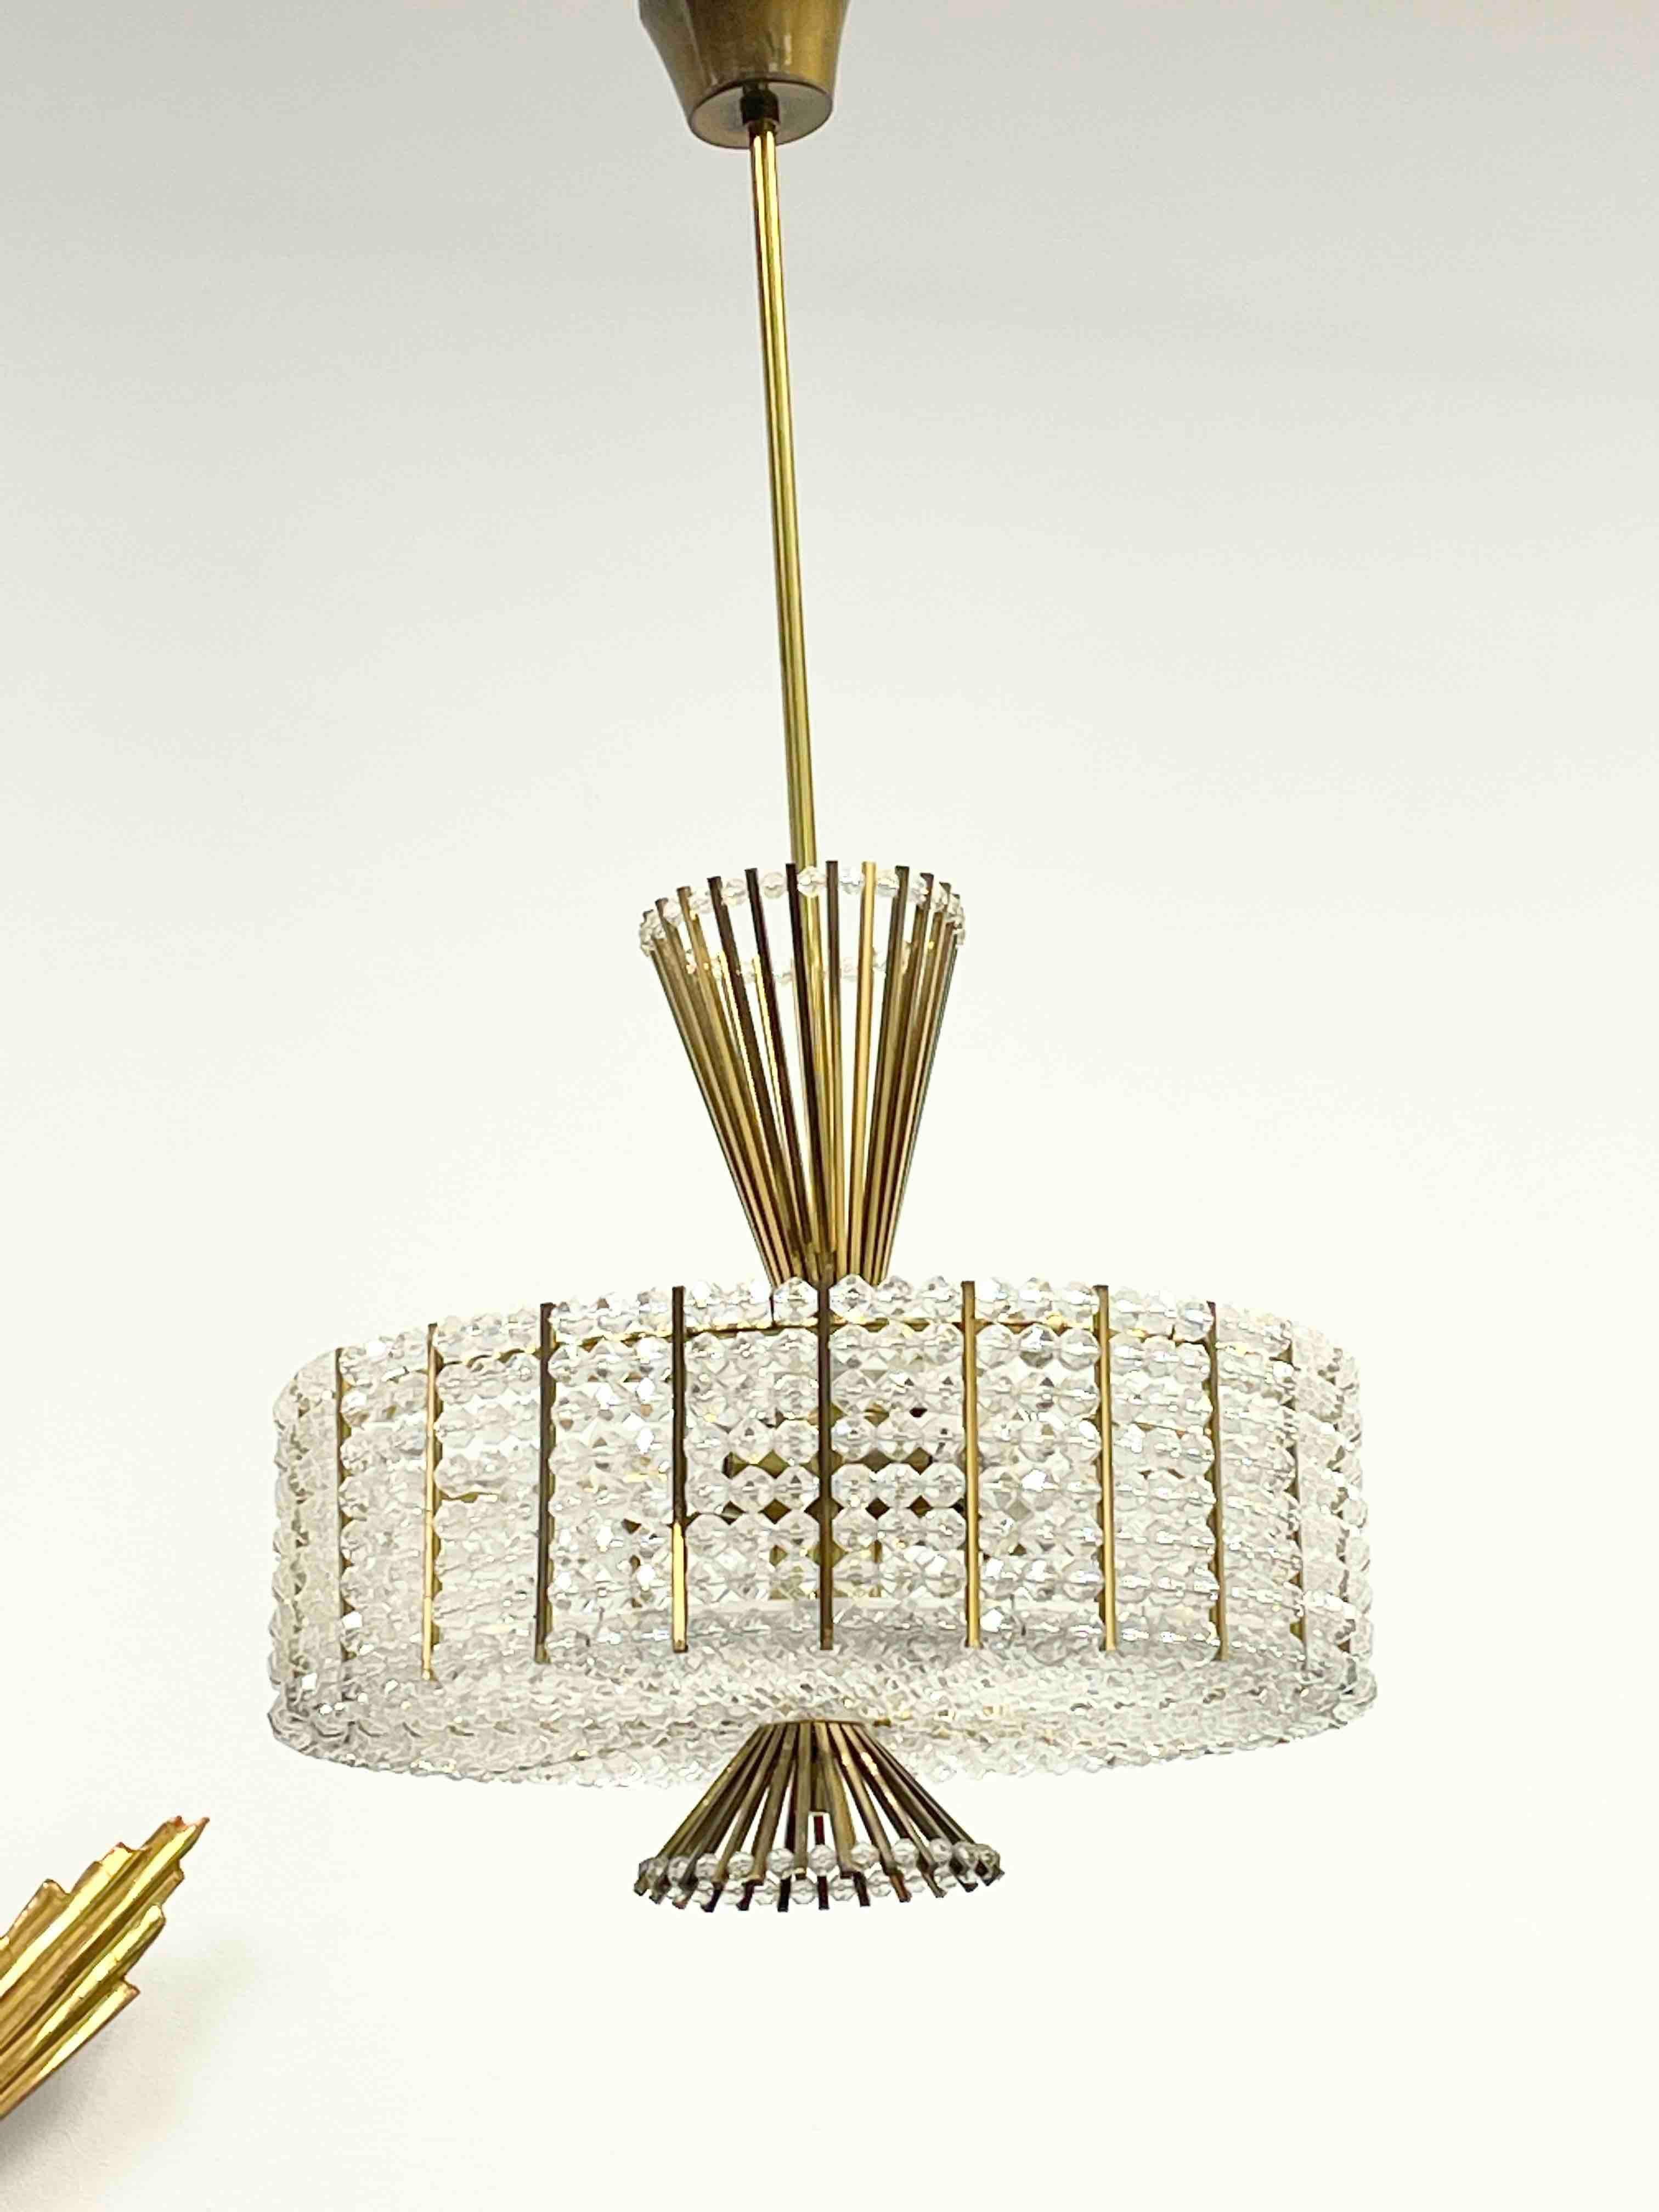 Beautiful and rare chandelier or pendant light by Emil Stejnar for Rupert Nikoll, Vienna, Austria. An original mid-century vintage piece manufactured around 1950. It is made of brass, lucite and hand-cut crystals. The Fixture requires five European